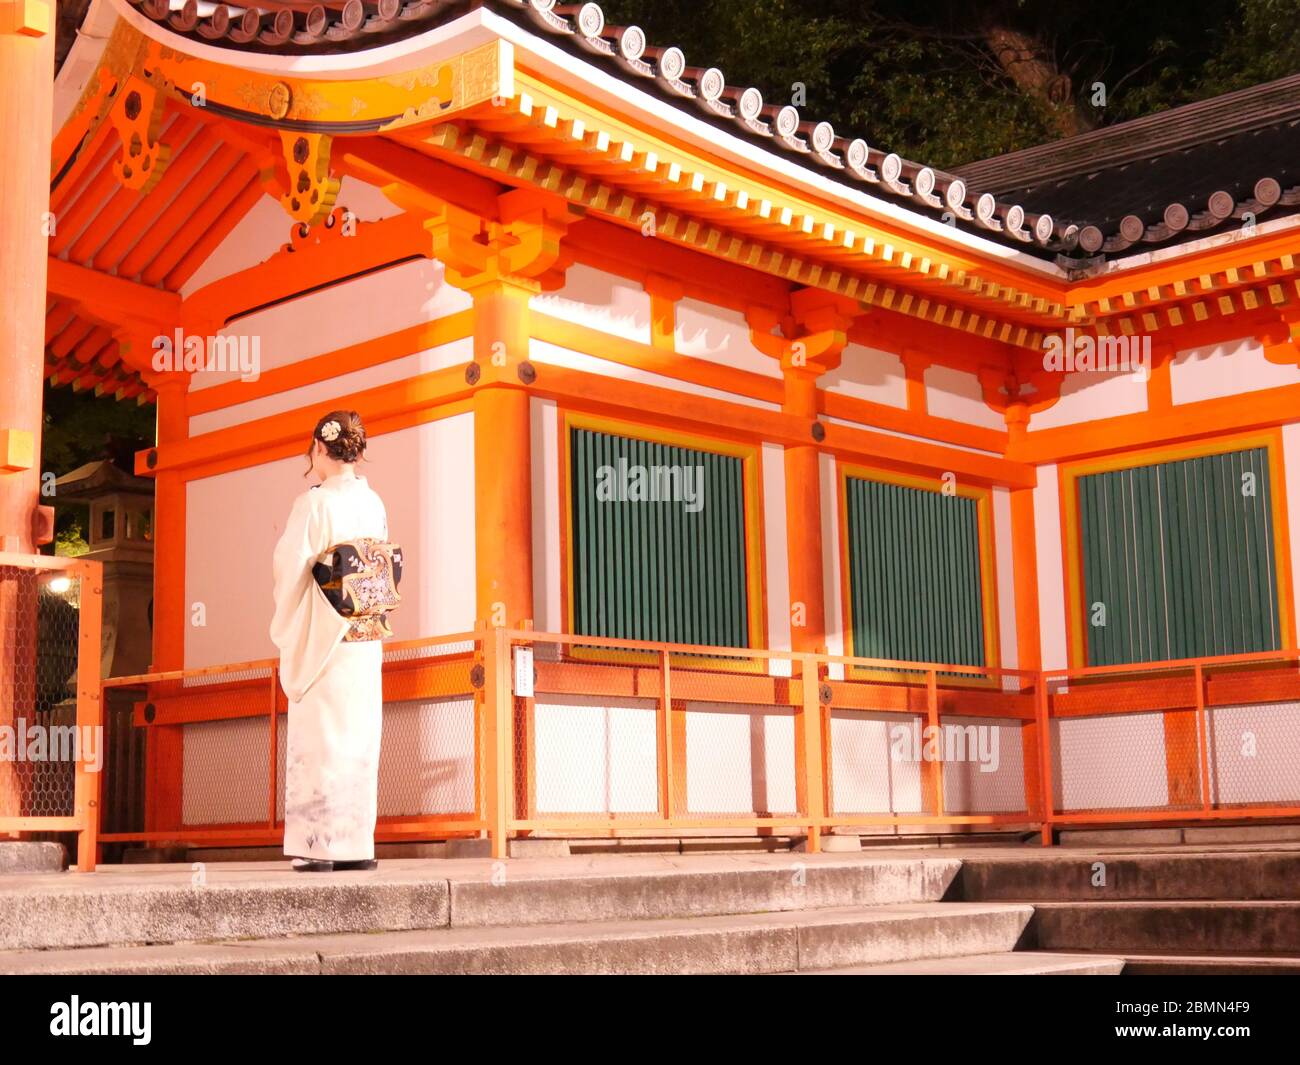 KYOTO, JAPAN - NOVEMBER 06, 2019: A young female visitor in kimono at the gate of Yasaka Shrine or Gion Shrine in Kyoto at night Stock Photo